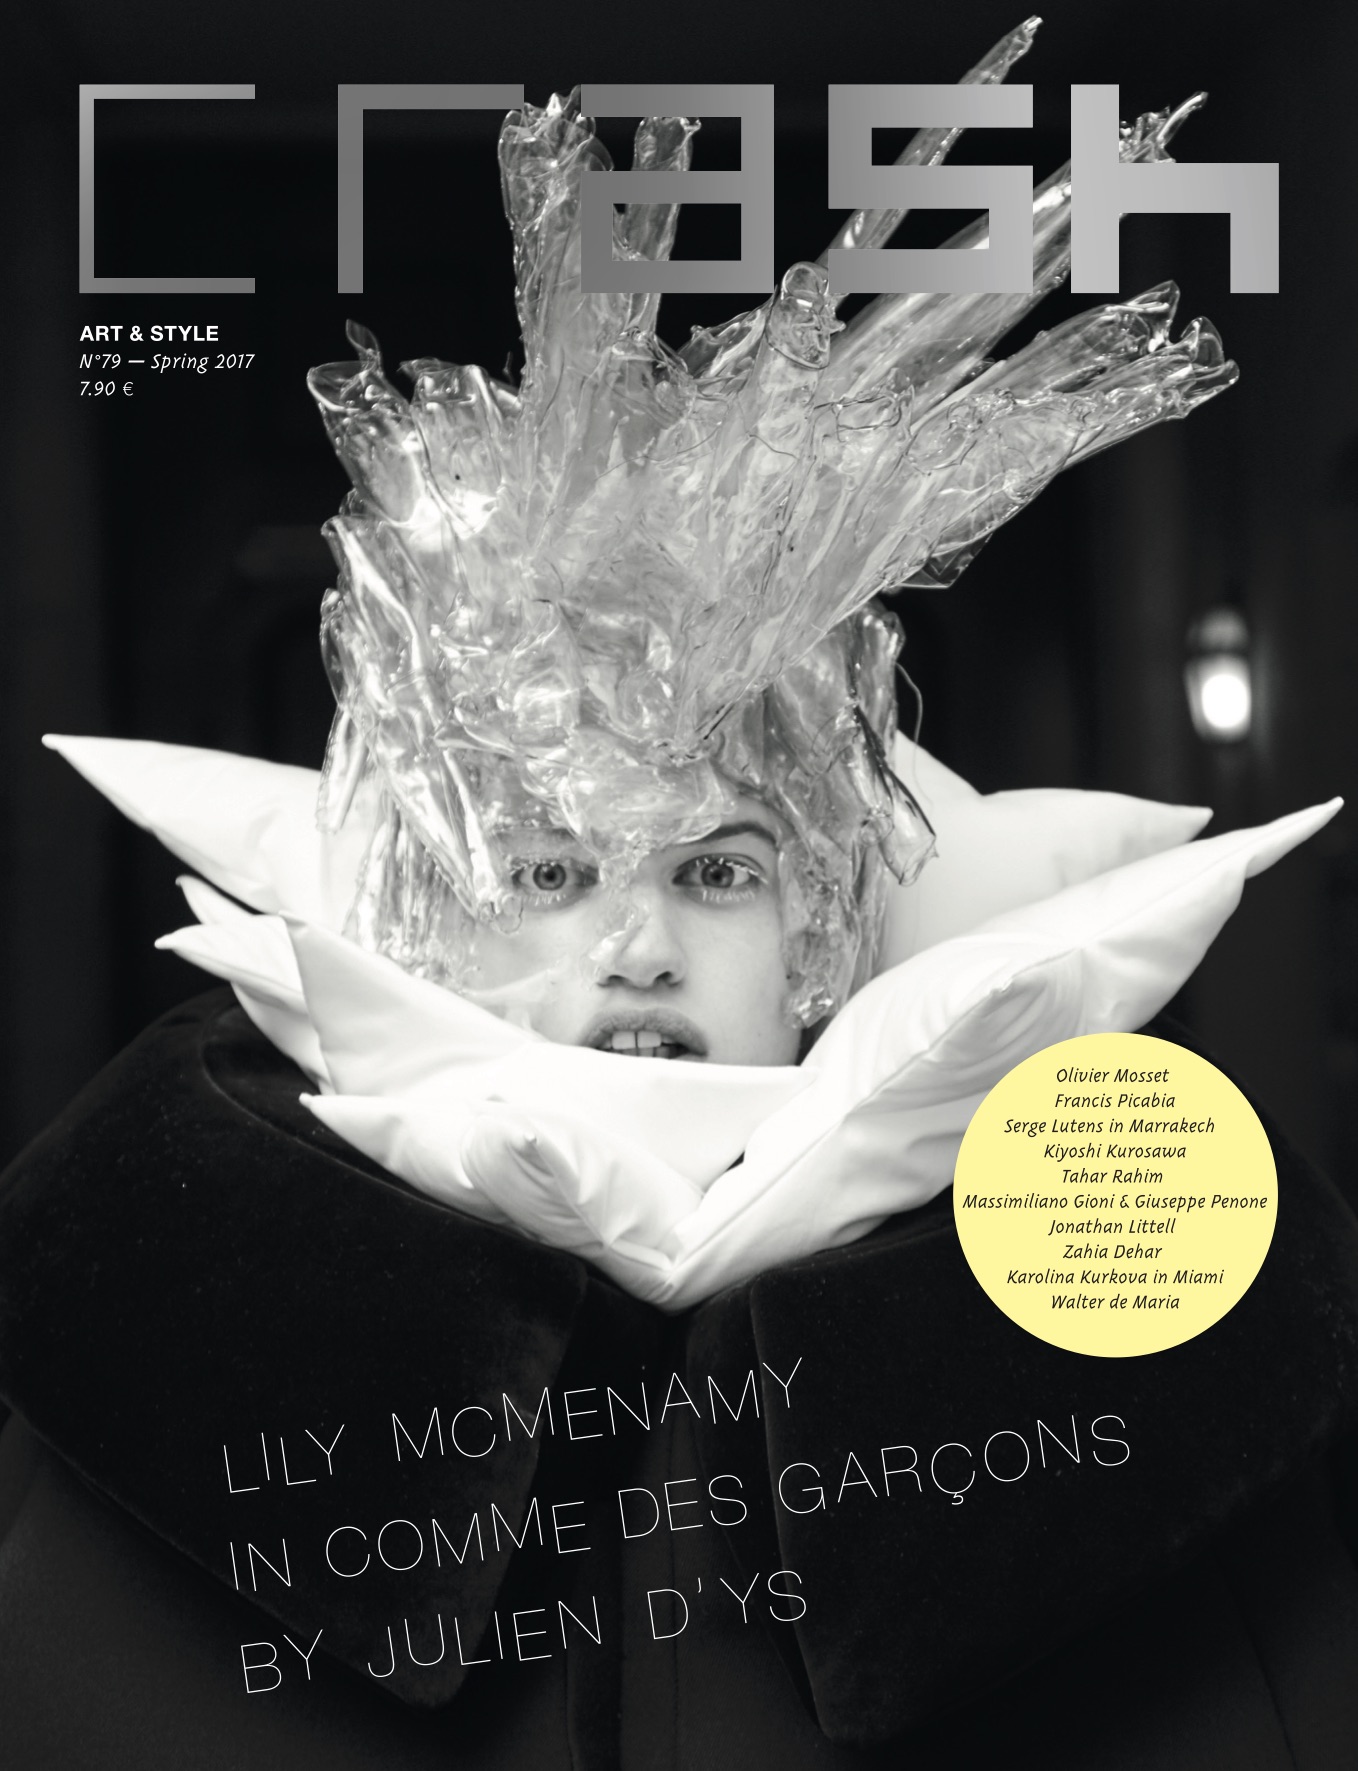 CRASH 79 THE FASHION ISSUE – LILY MCMENAMY IN COMME DES GARÇONS BY JULIEN D’YS